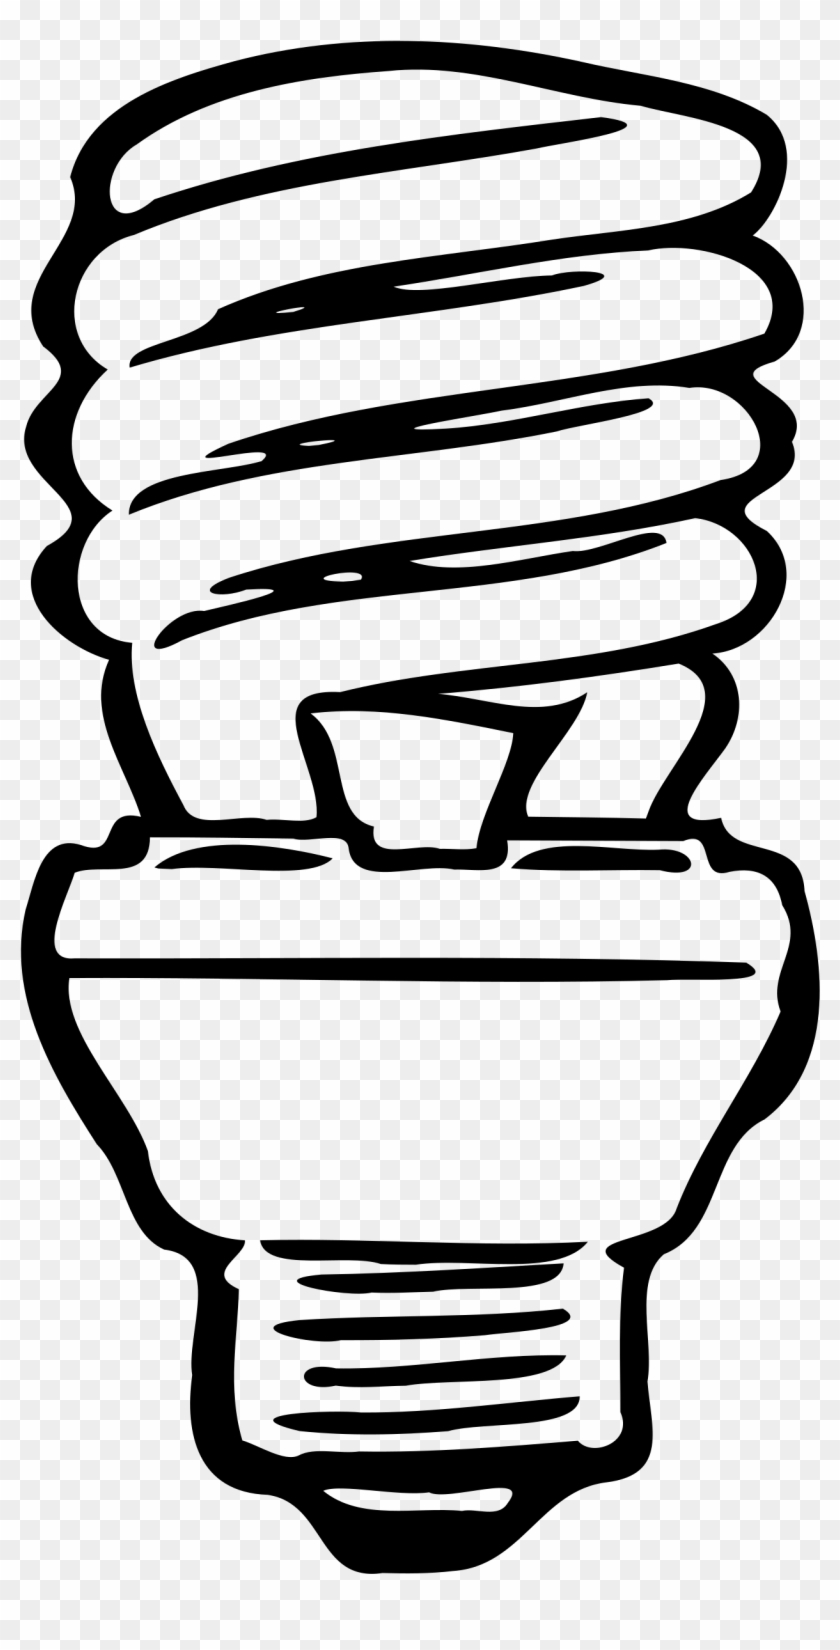 Png Free Download Honor Student Clip Arts For Free - Fluorescent Light Bulb Clip Art Transparent Png #569040